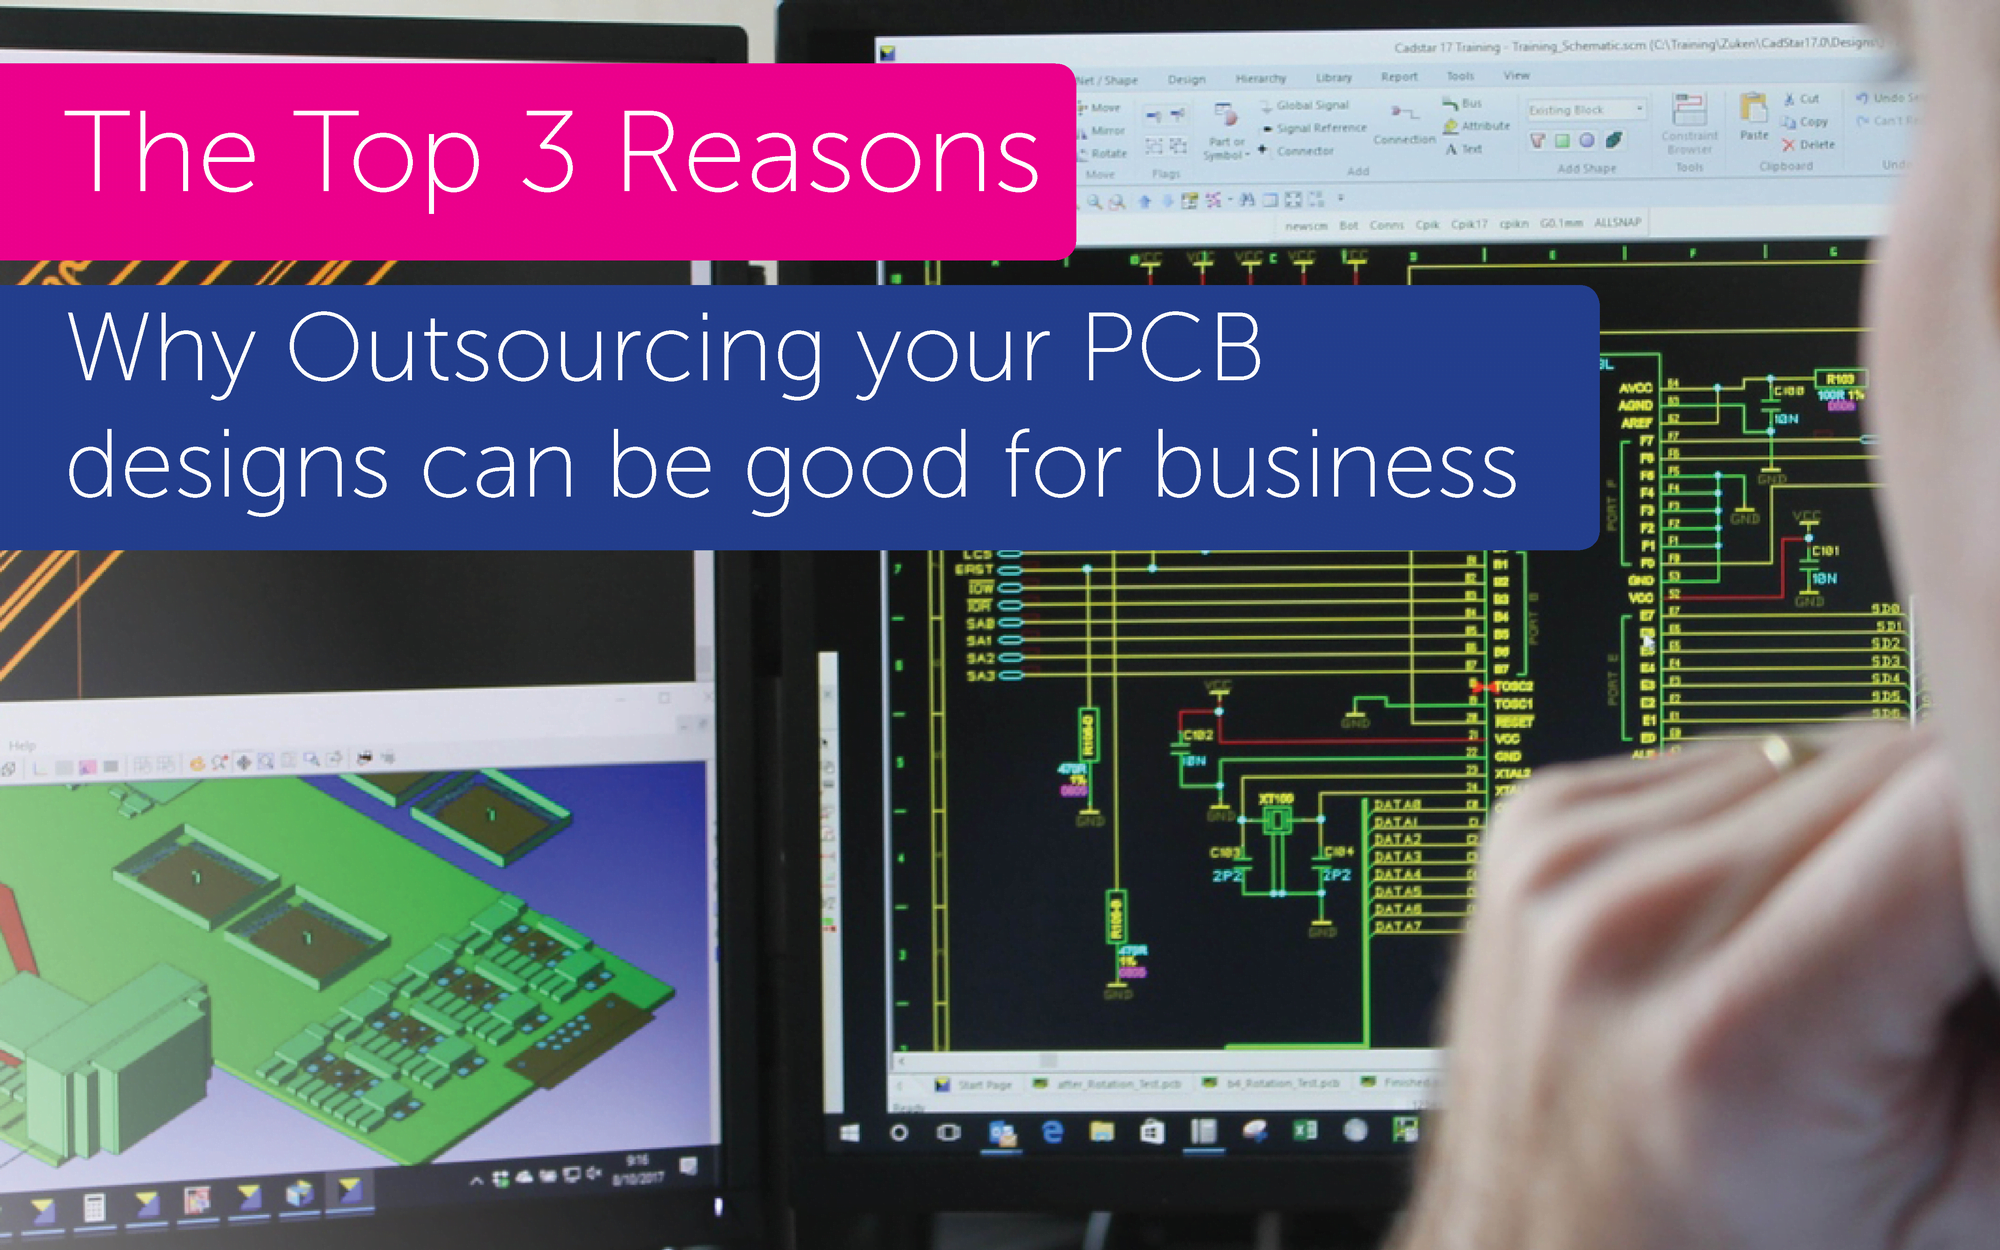 Top 3 Reasons why PCB design outsourcing could be good for business